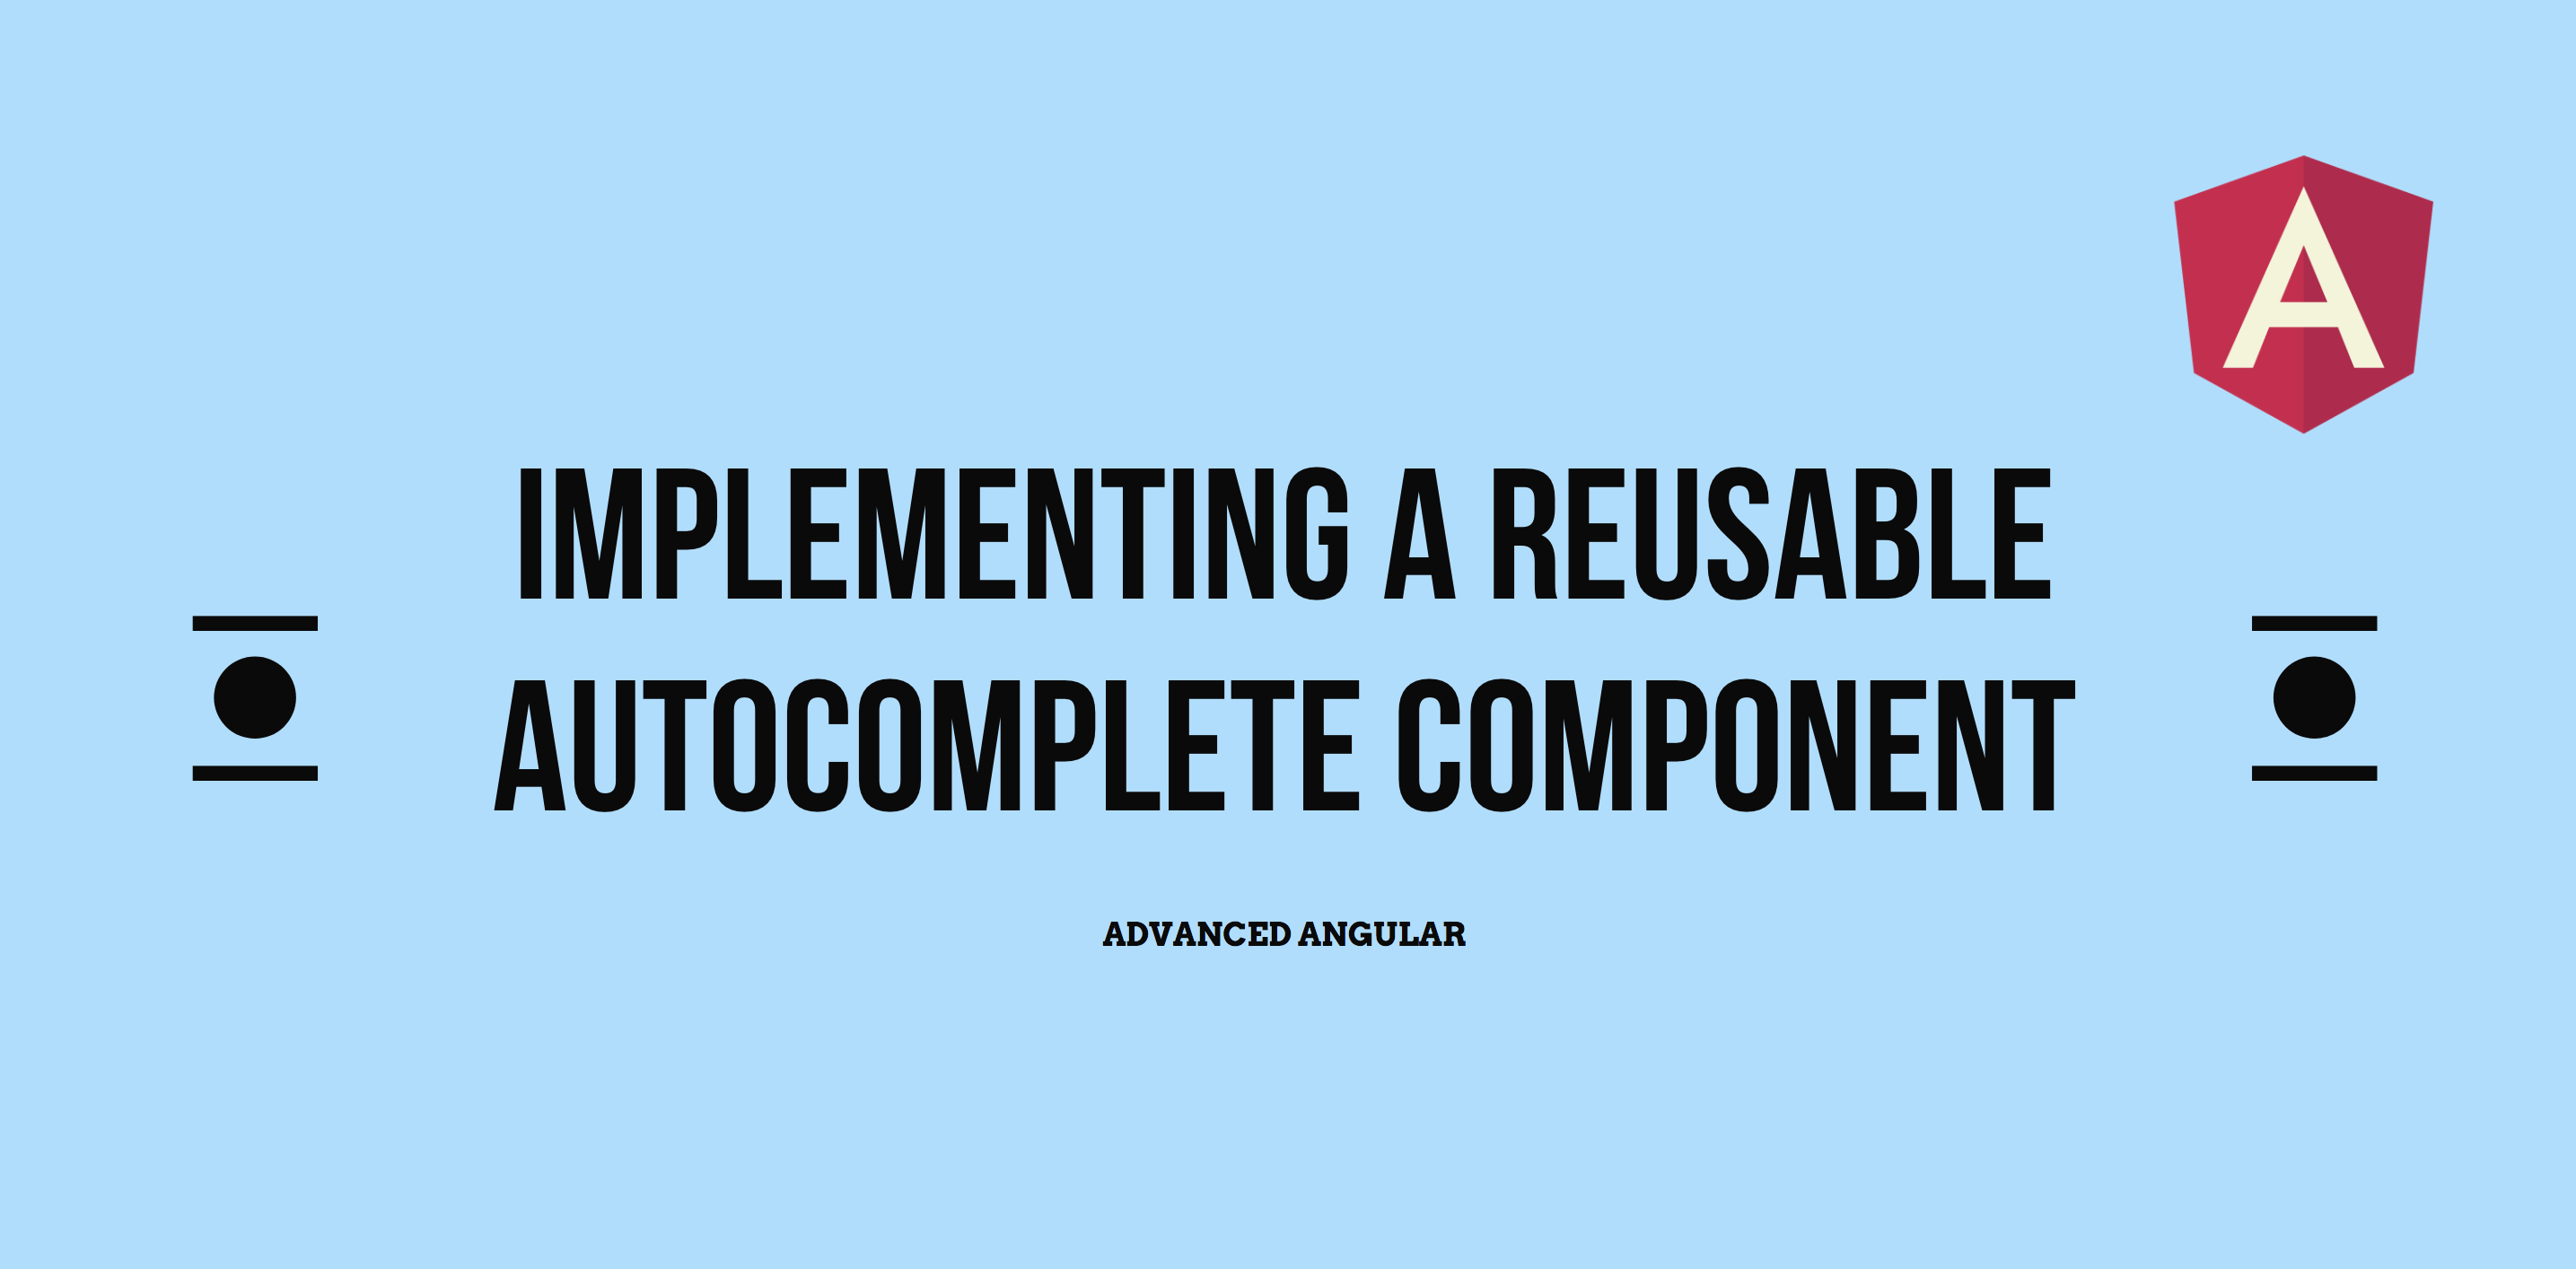 Advanced Angular: Implementing a Reusable Autocomplete Component